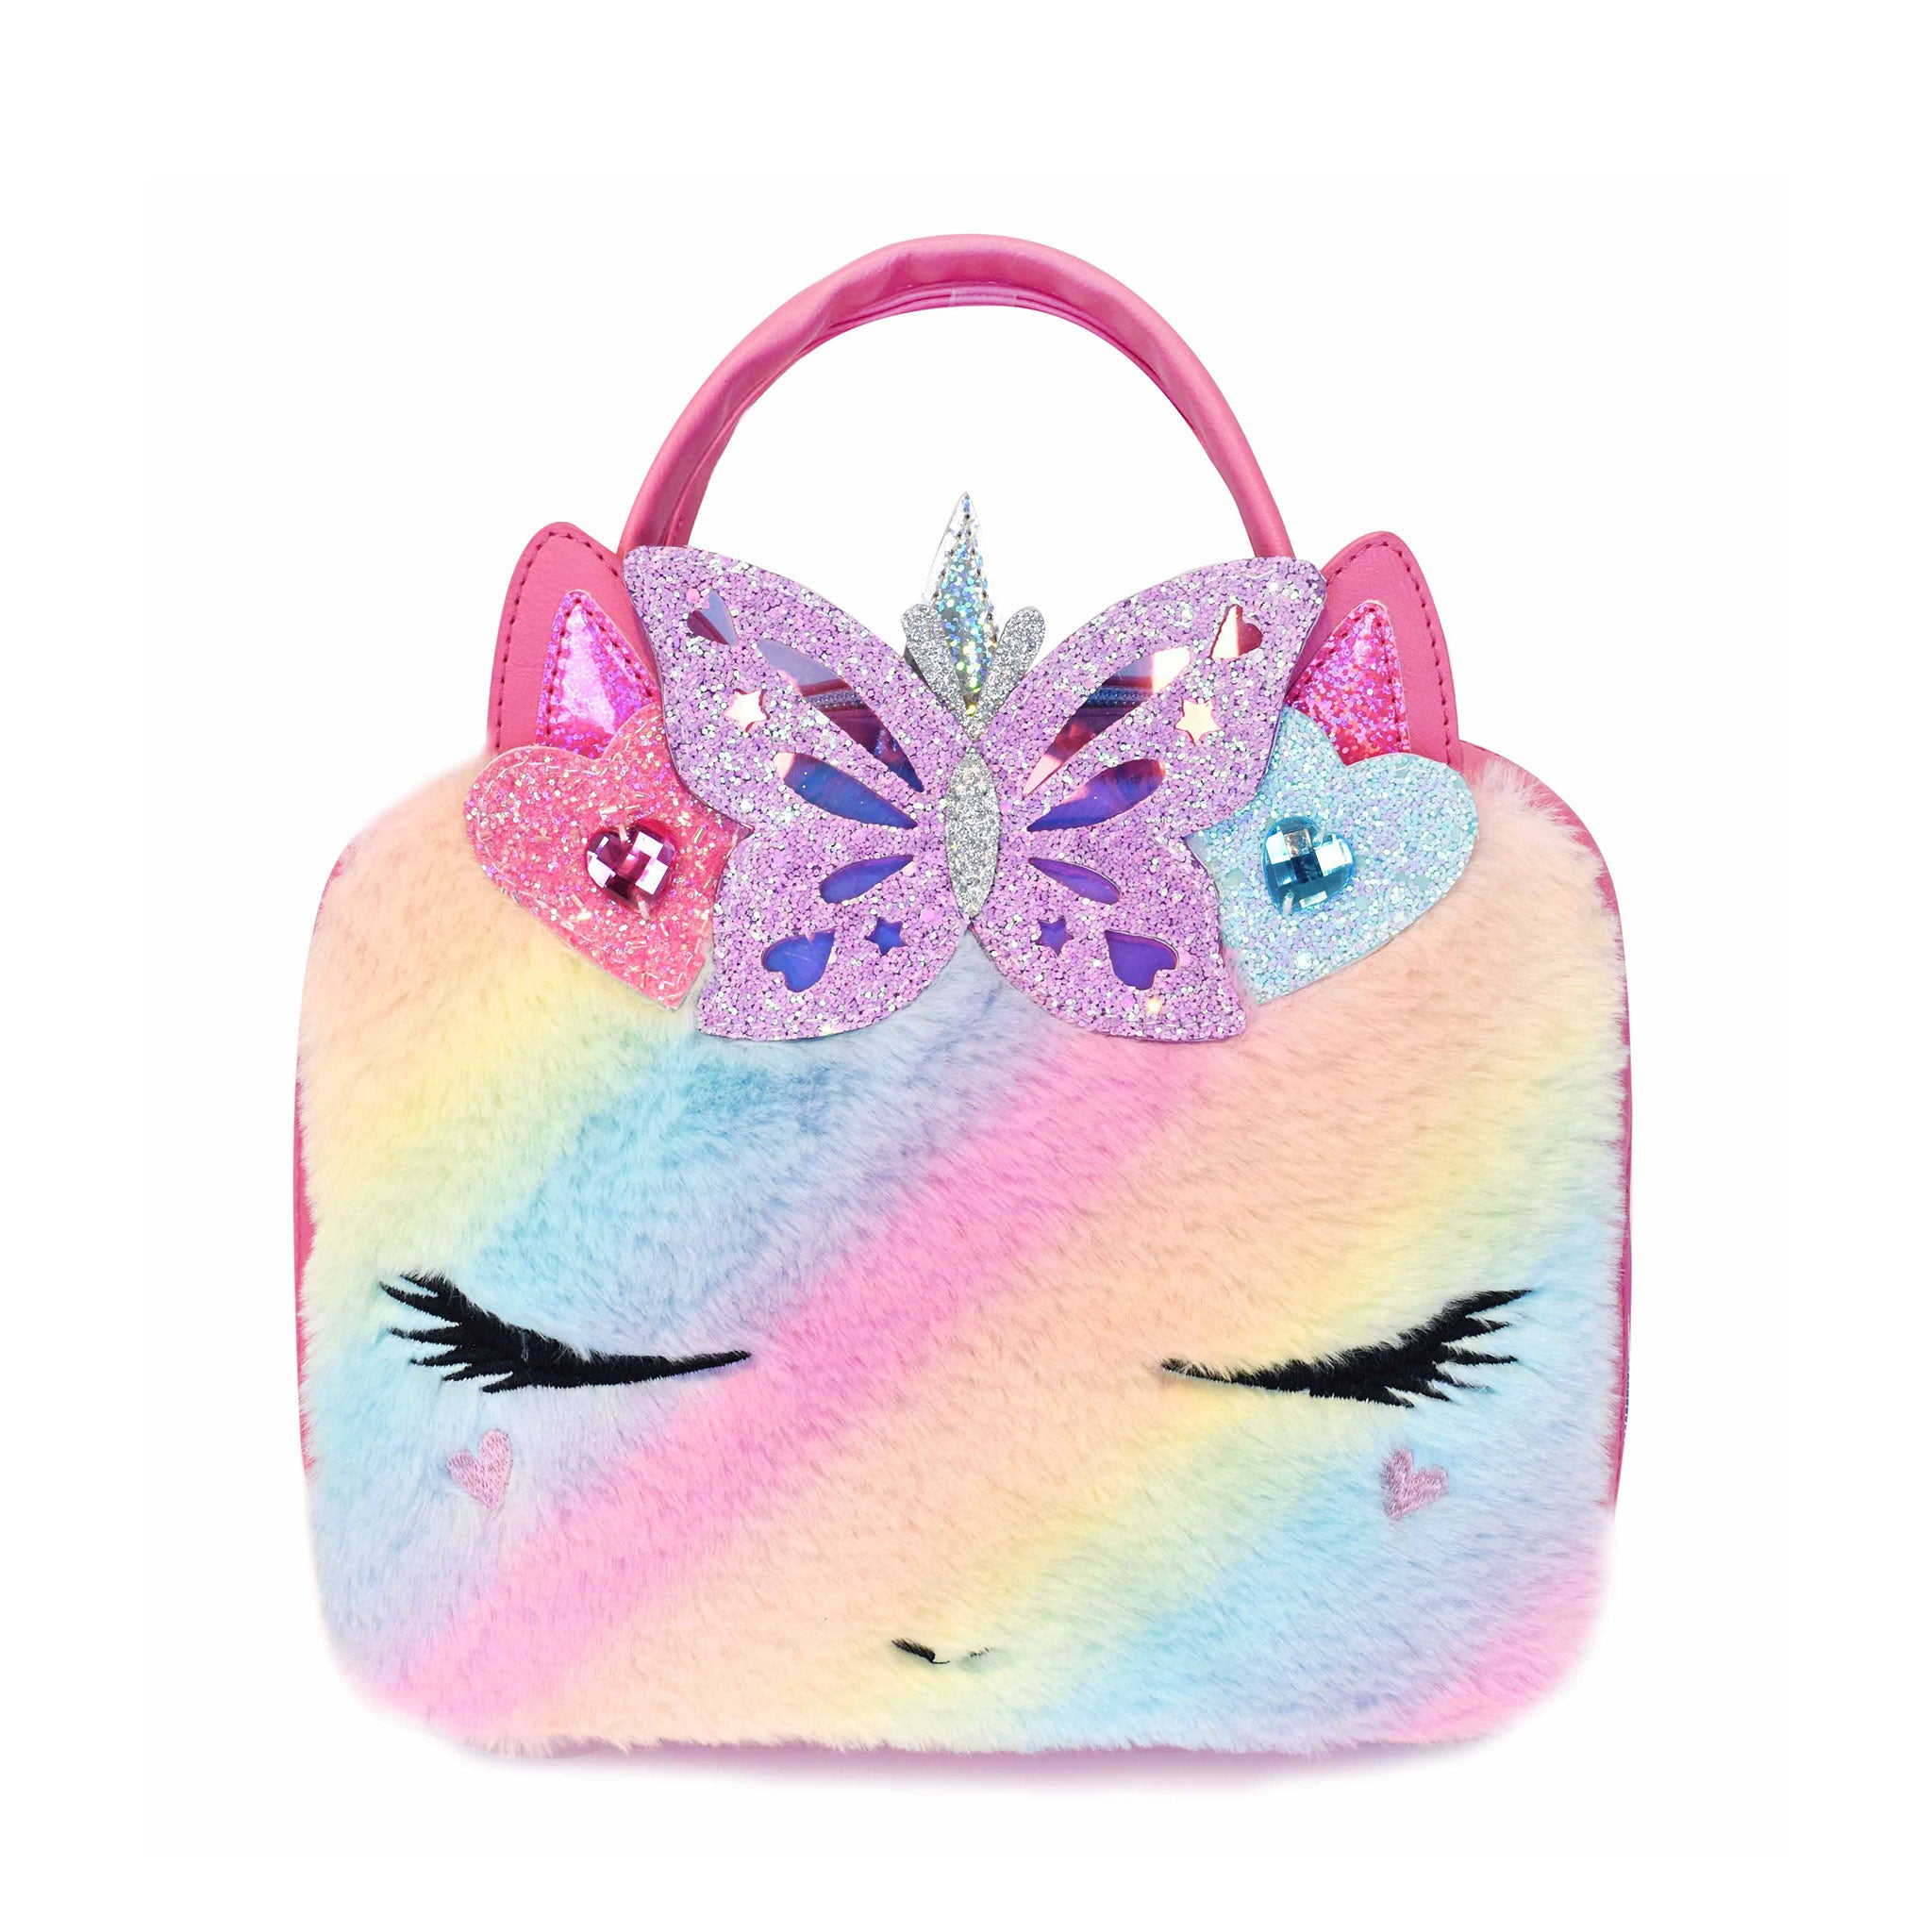 Front view of a unicorn face rectangular lunch bag in an ombre plush with a glitter heart crown applique